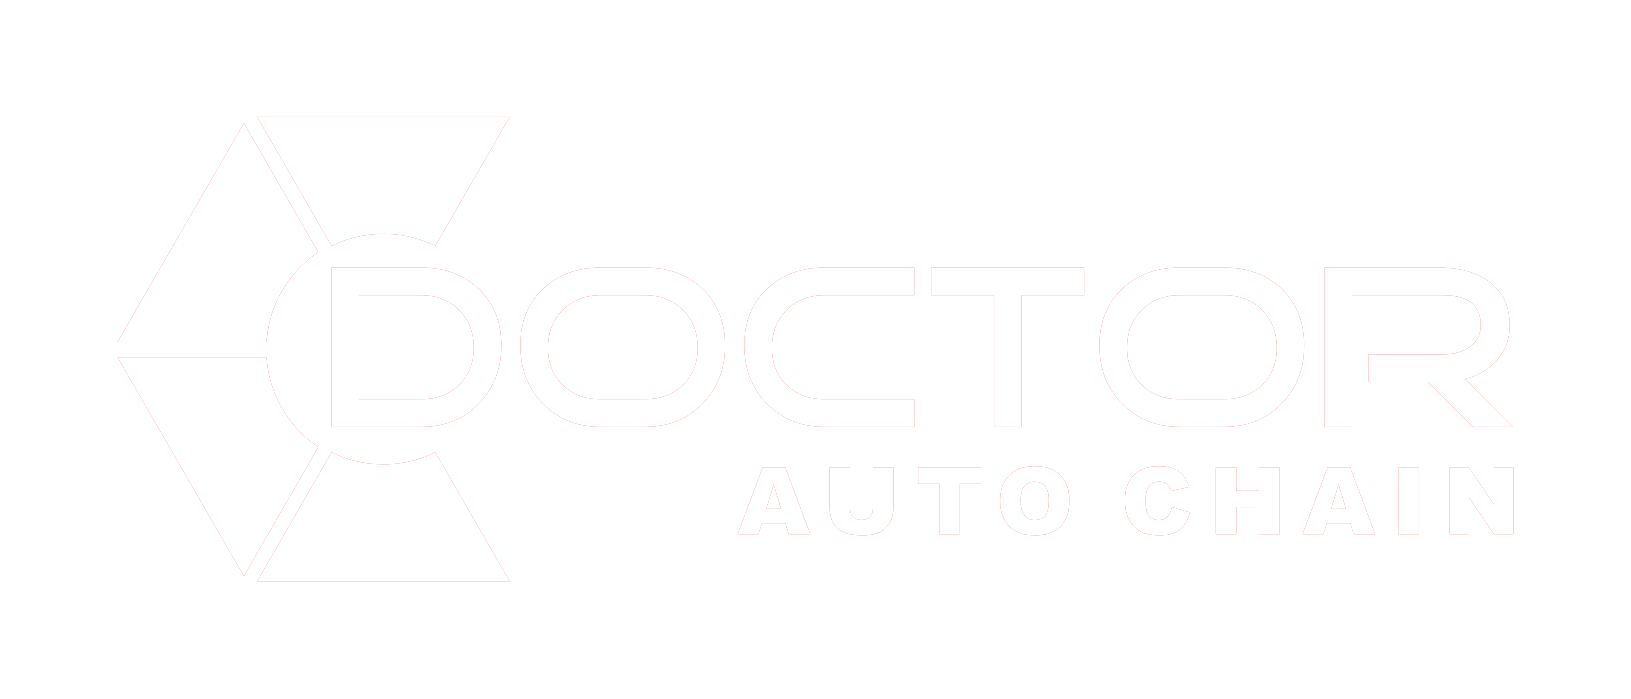 Doctor